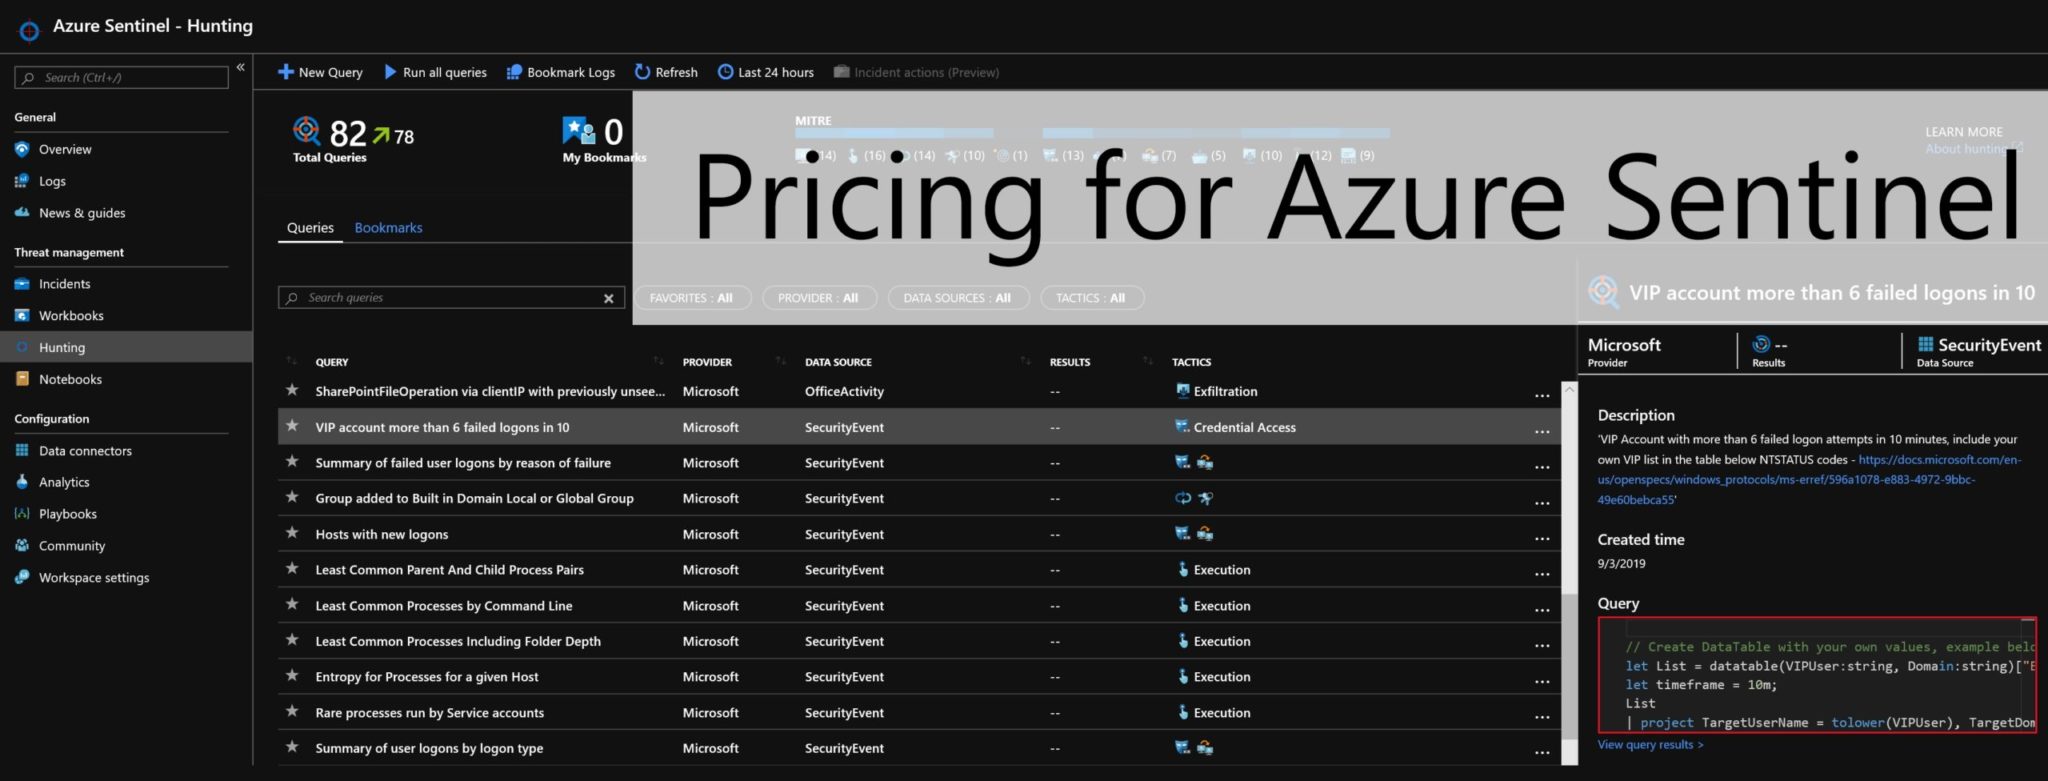 Pricing for Azure Sentinel is GA 1